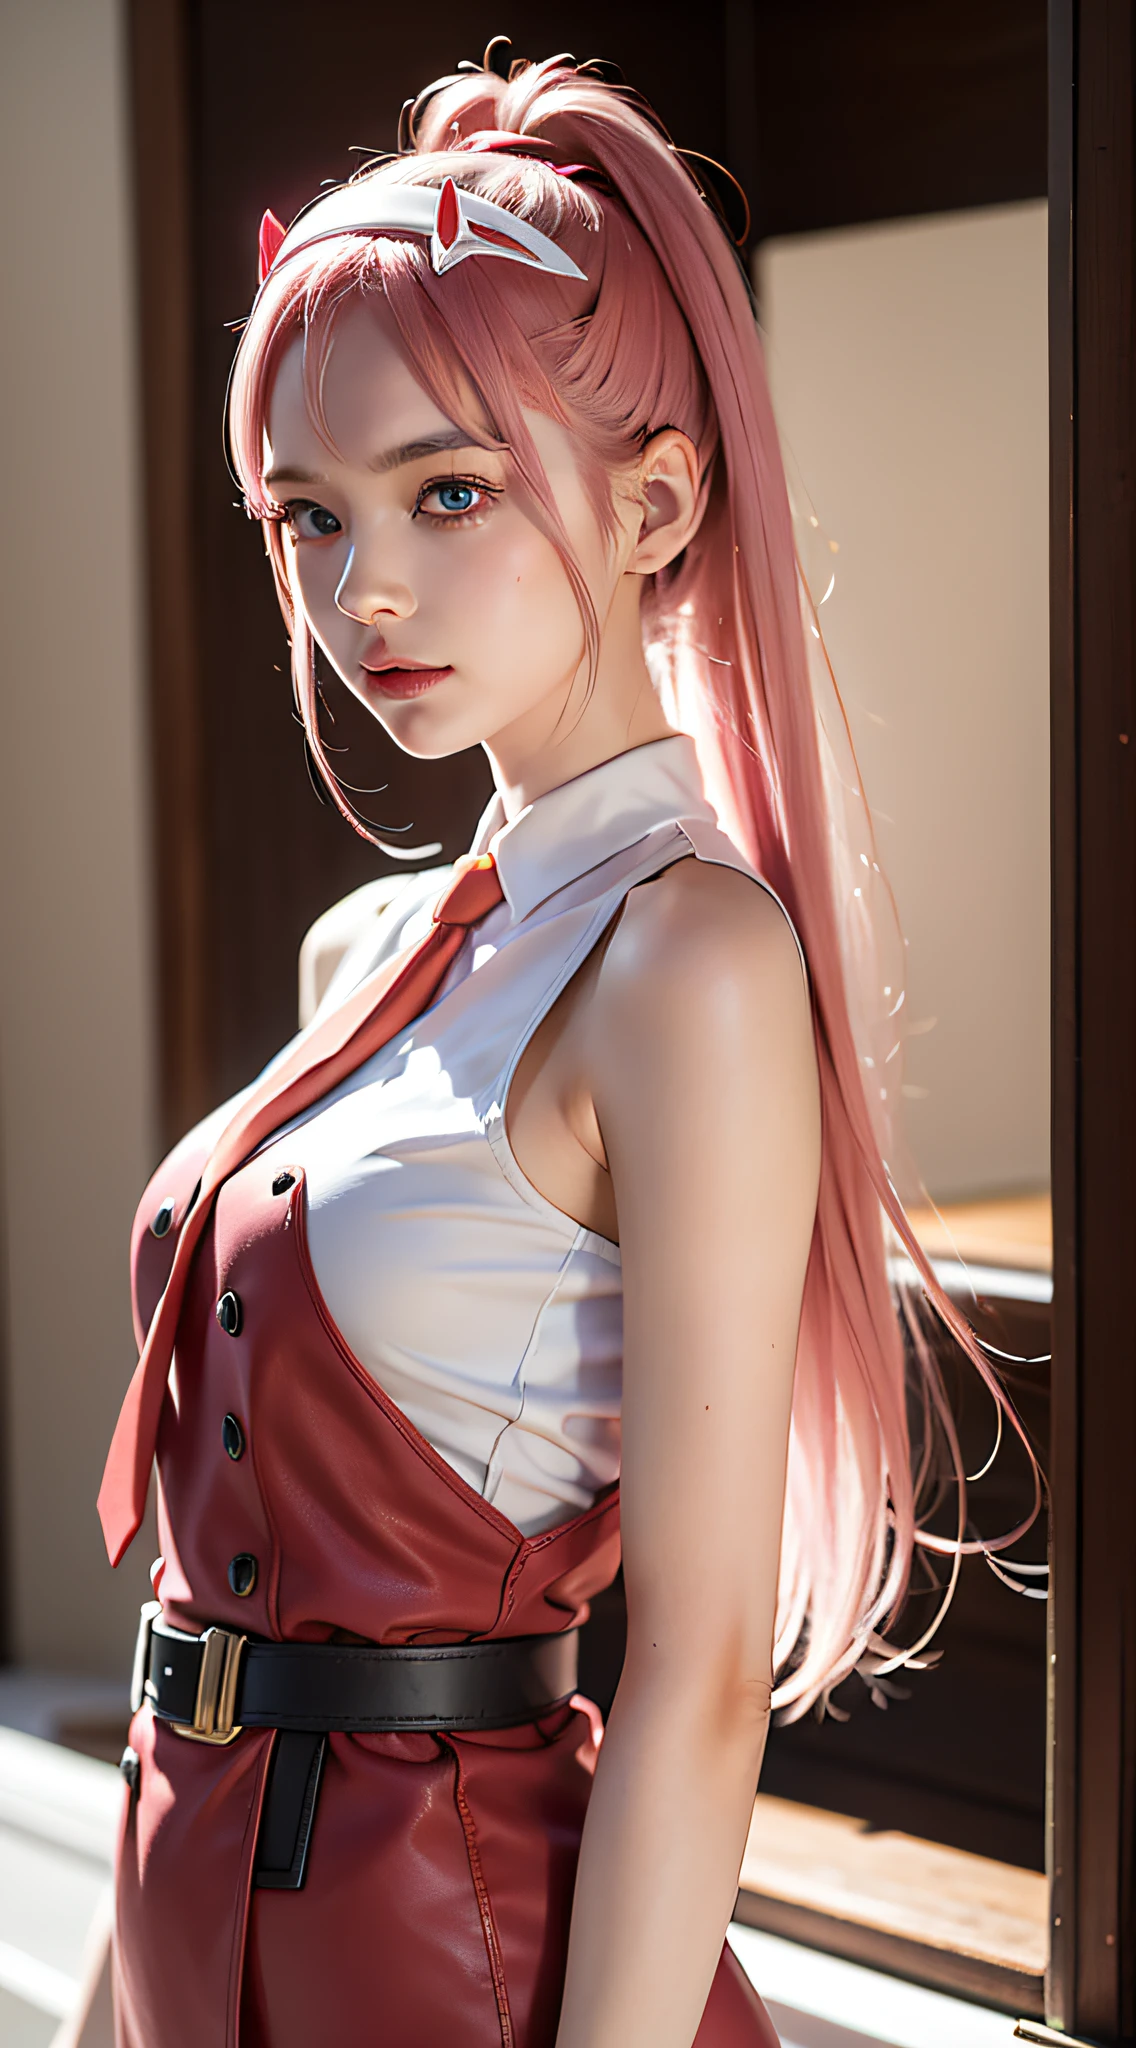 zero two from the anime darling in the franxx, woman, beautiful woman, perfect body, perfect breasts, very beautiful, long hair, pink hair, ponytail hair, wearing a red uniform, yellow tie, black pants, white shoes, blue eyes, red spots wearing a headband red-horned, smiling, looking at the audience, standing, realism, masterpiece, textured leather, super detailed, high detail, high quality, best quality, 1080p, 16k